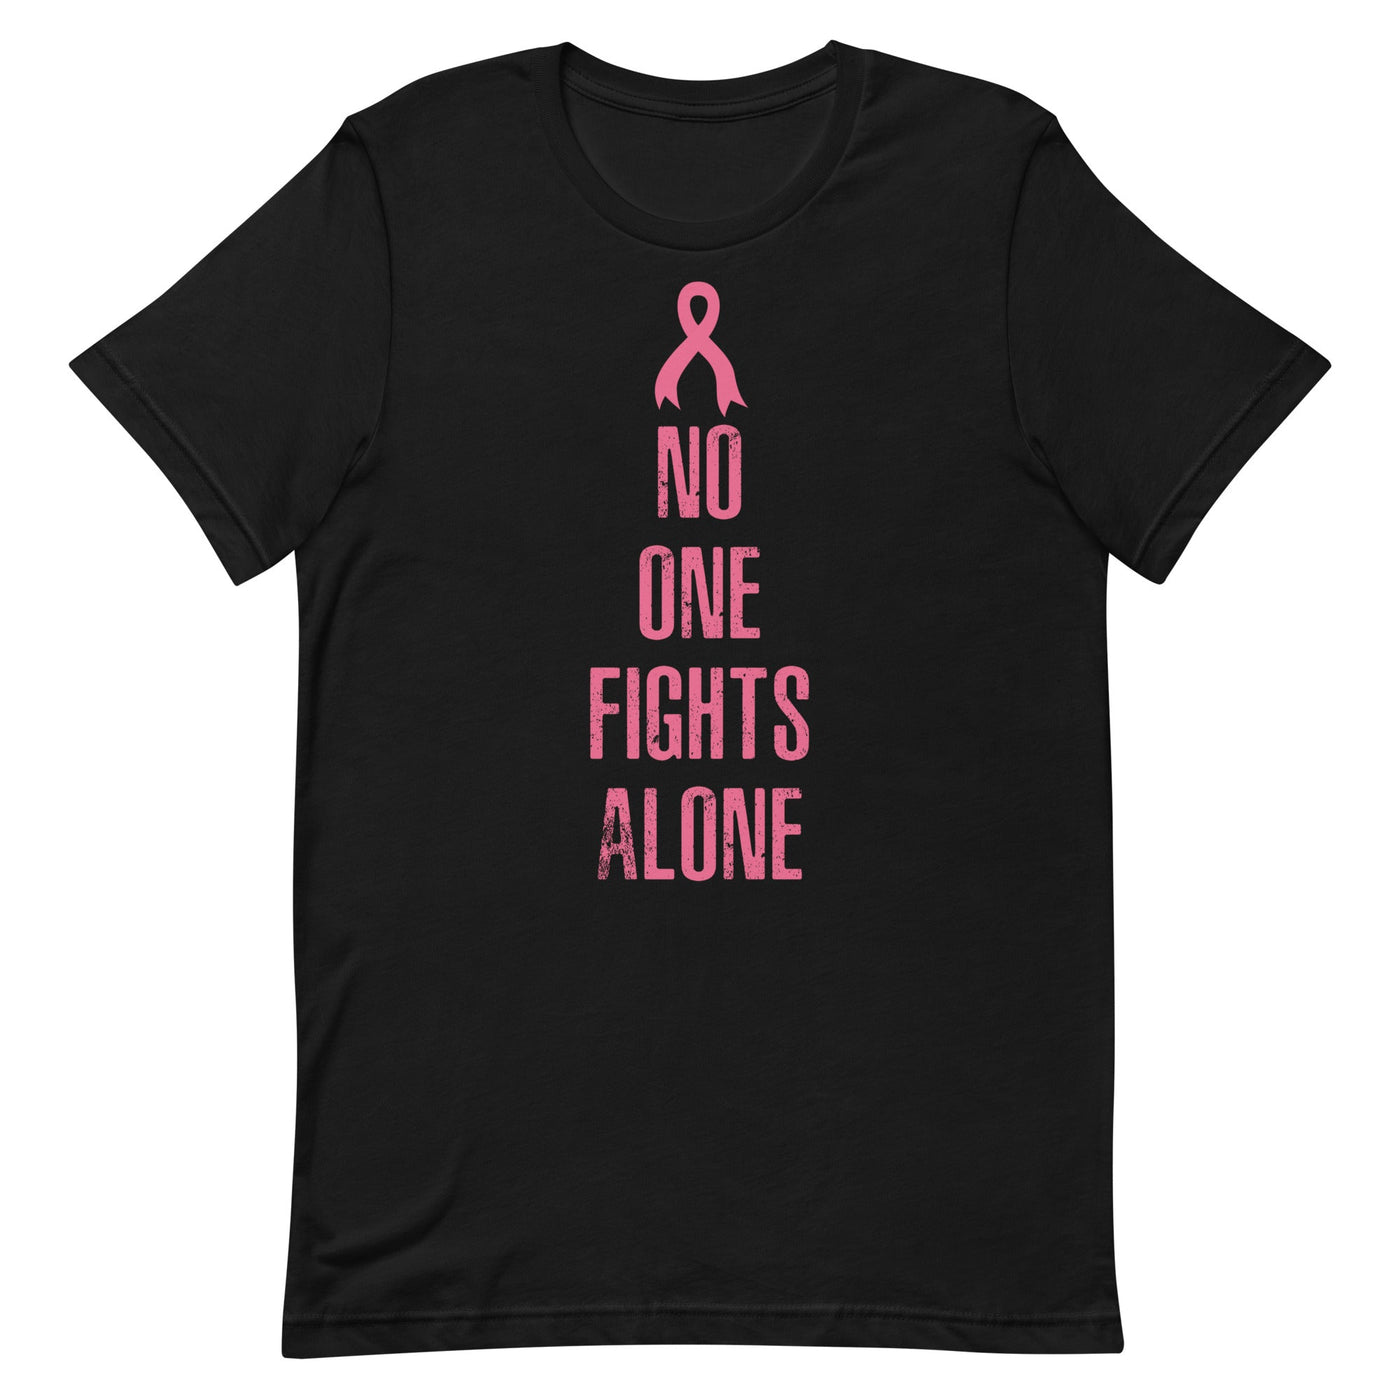 NO ONE FIGHTS ALONE WOMEN'S T-SHIRT- PINK FONT Black S 